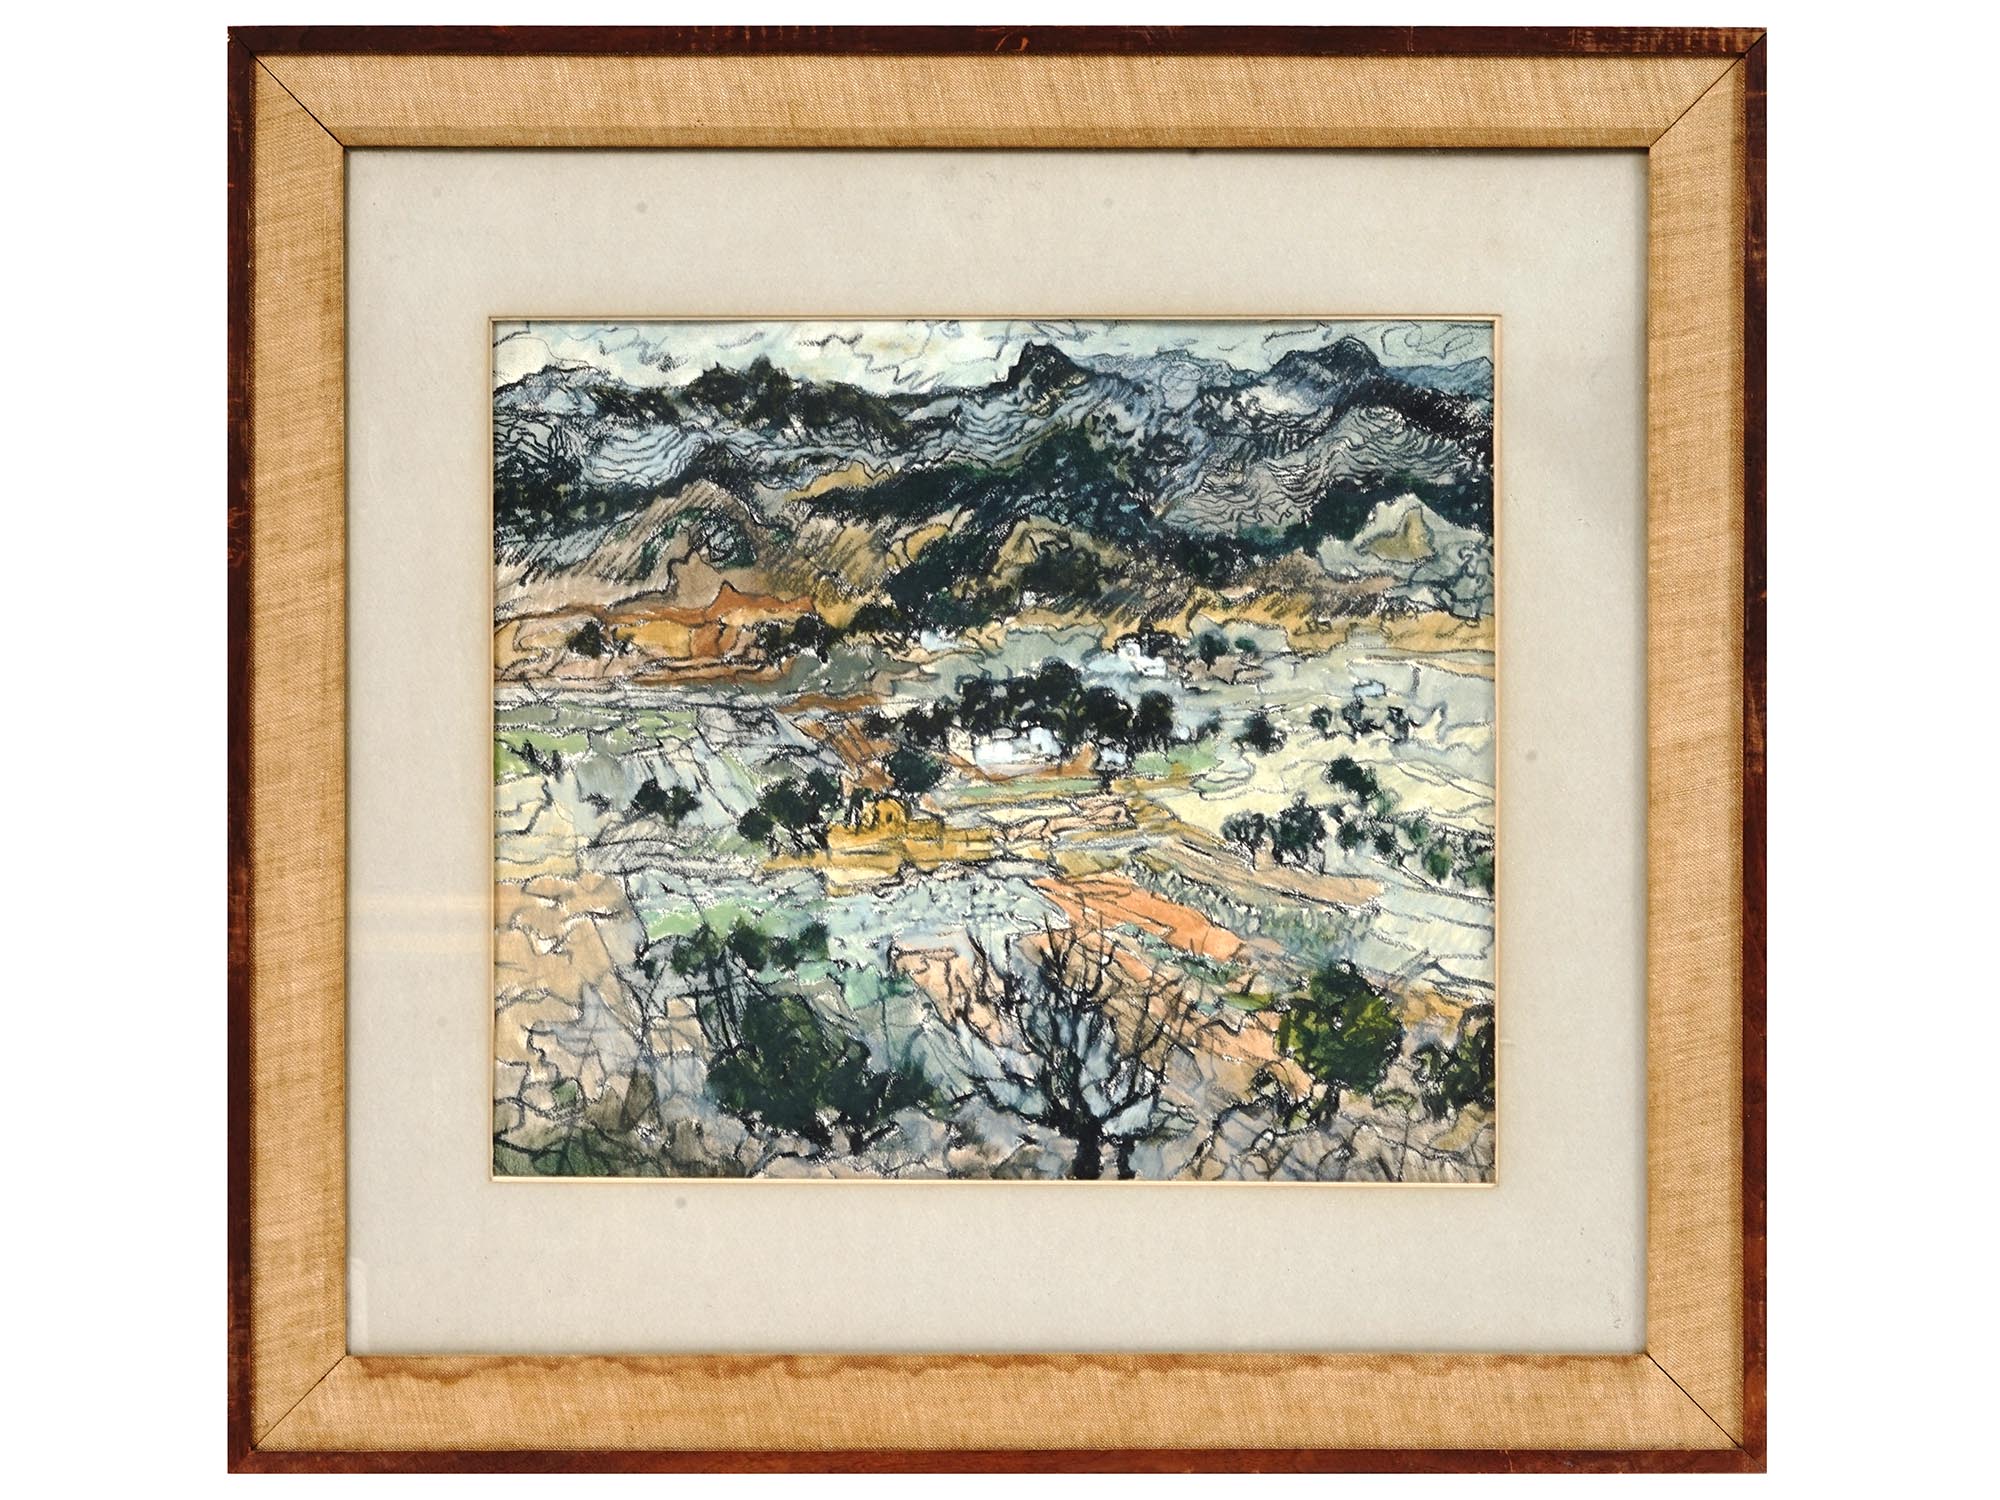 LANDSCAPE MIXED MEDIA PAINTING BY STANLEY TASKER PIC-0